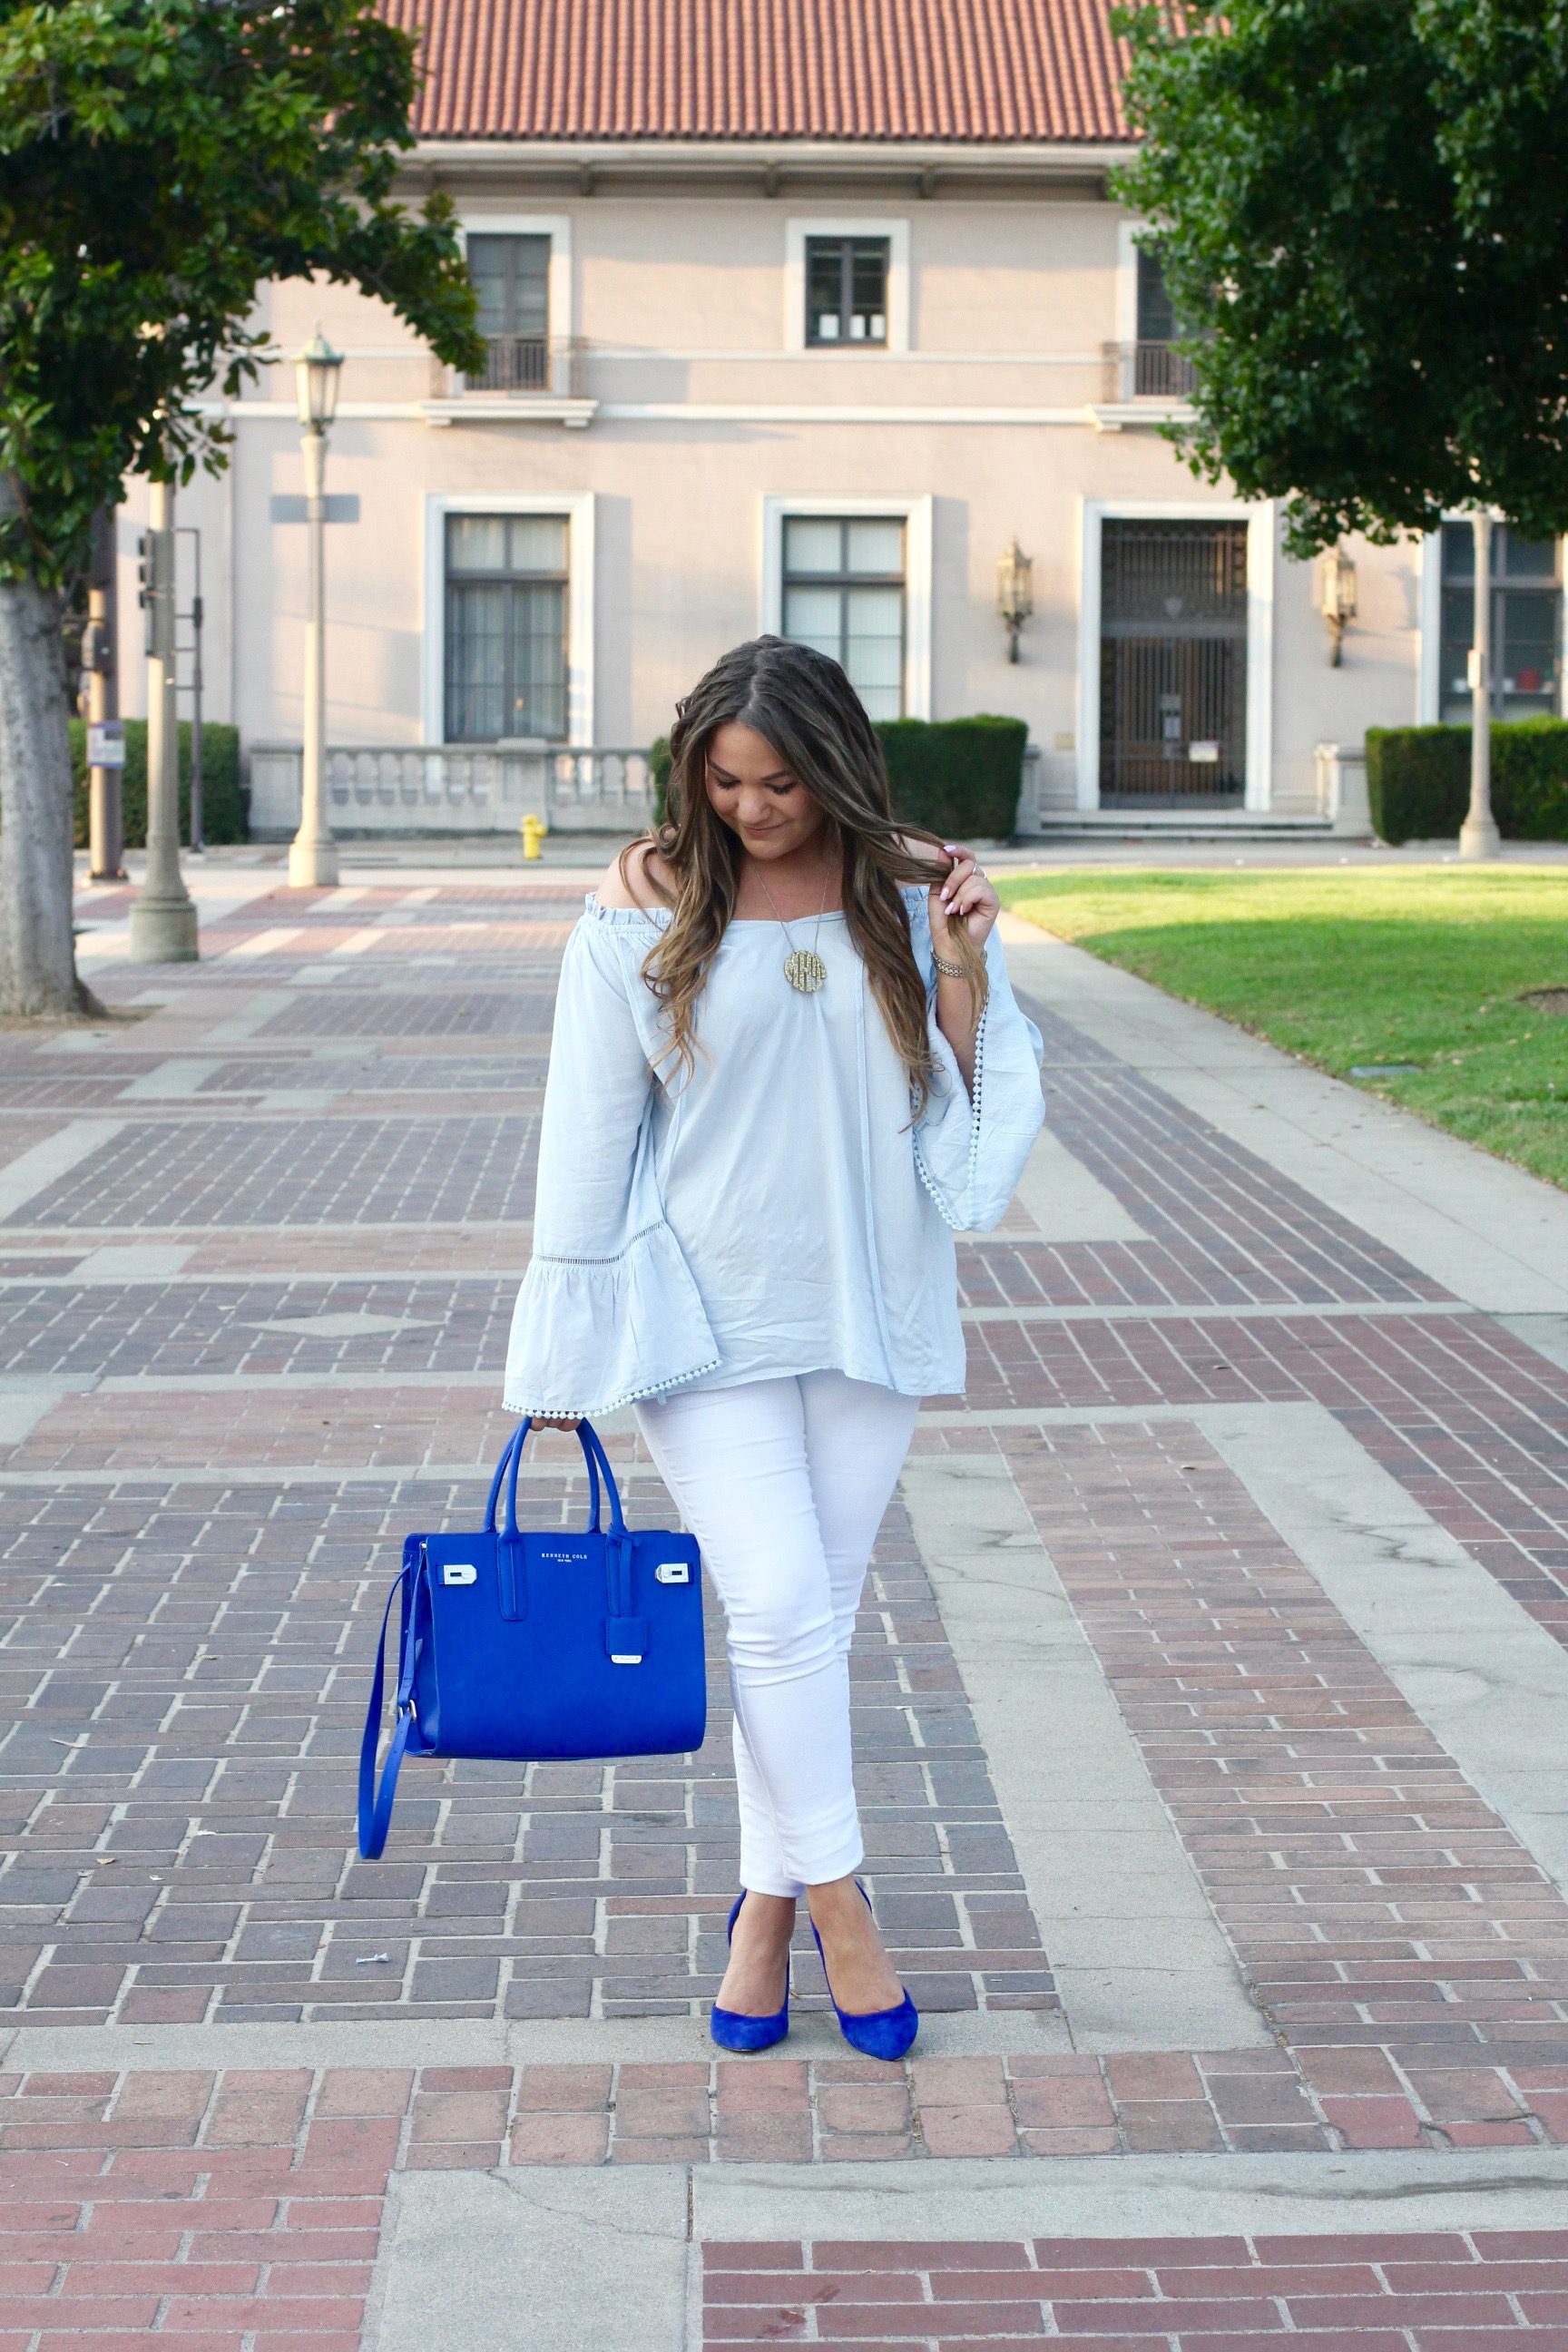 missyonmadison, baublebar monogram necklace, acrylic monogram necklace, white skinny jeans, old navy, old navy white skinny jeans, make me chic, make me chic off the shoulder bell top, cold shoulder top, off the shoulder blouse, la blogger, blogger, style blogger, la style, fall style, how to wear white jeans, how to style white after labor day, cobalt blue satchel, cobalt blue bag, blue suede shoes, blue pumps, cobalt blue pumps, cobalt blue suede pumps, hair goals, brunette hair, fashion blogger, fall trends, street style,